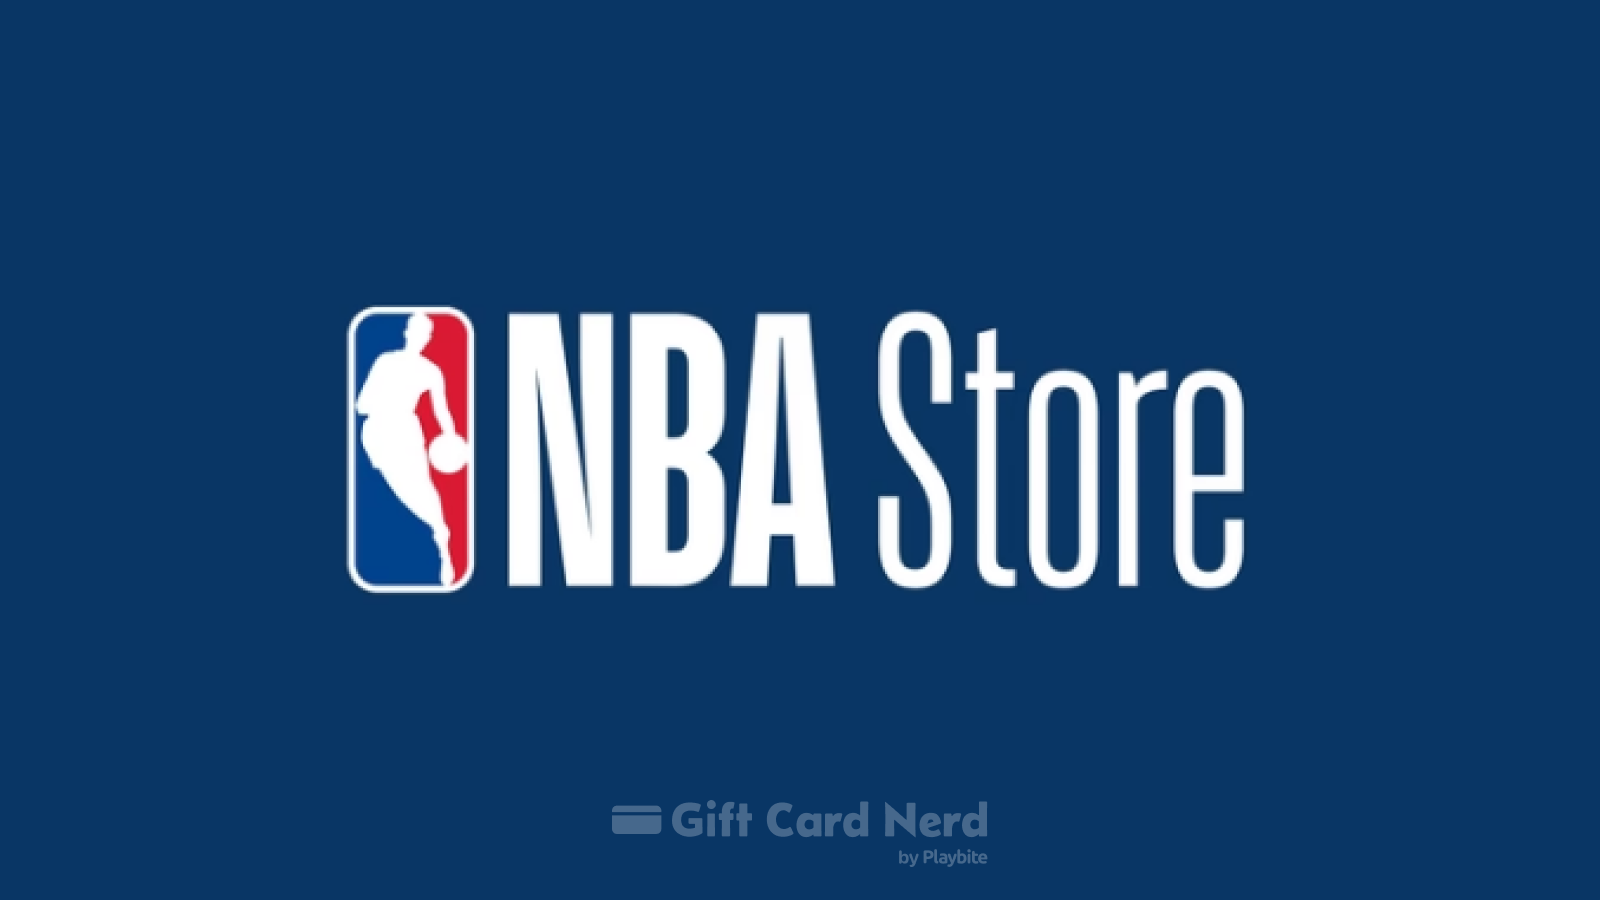 Can I Use an NBA Store Gift Card on PayPal?